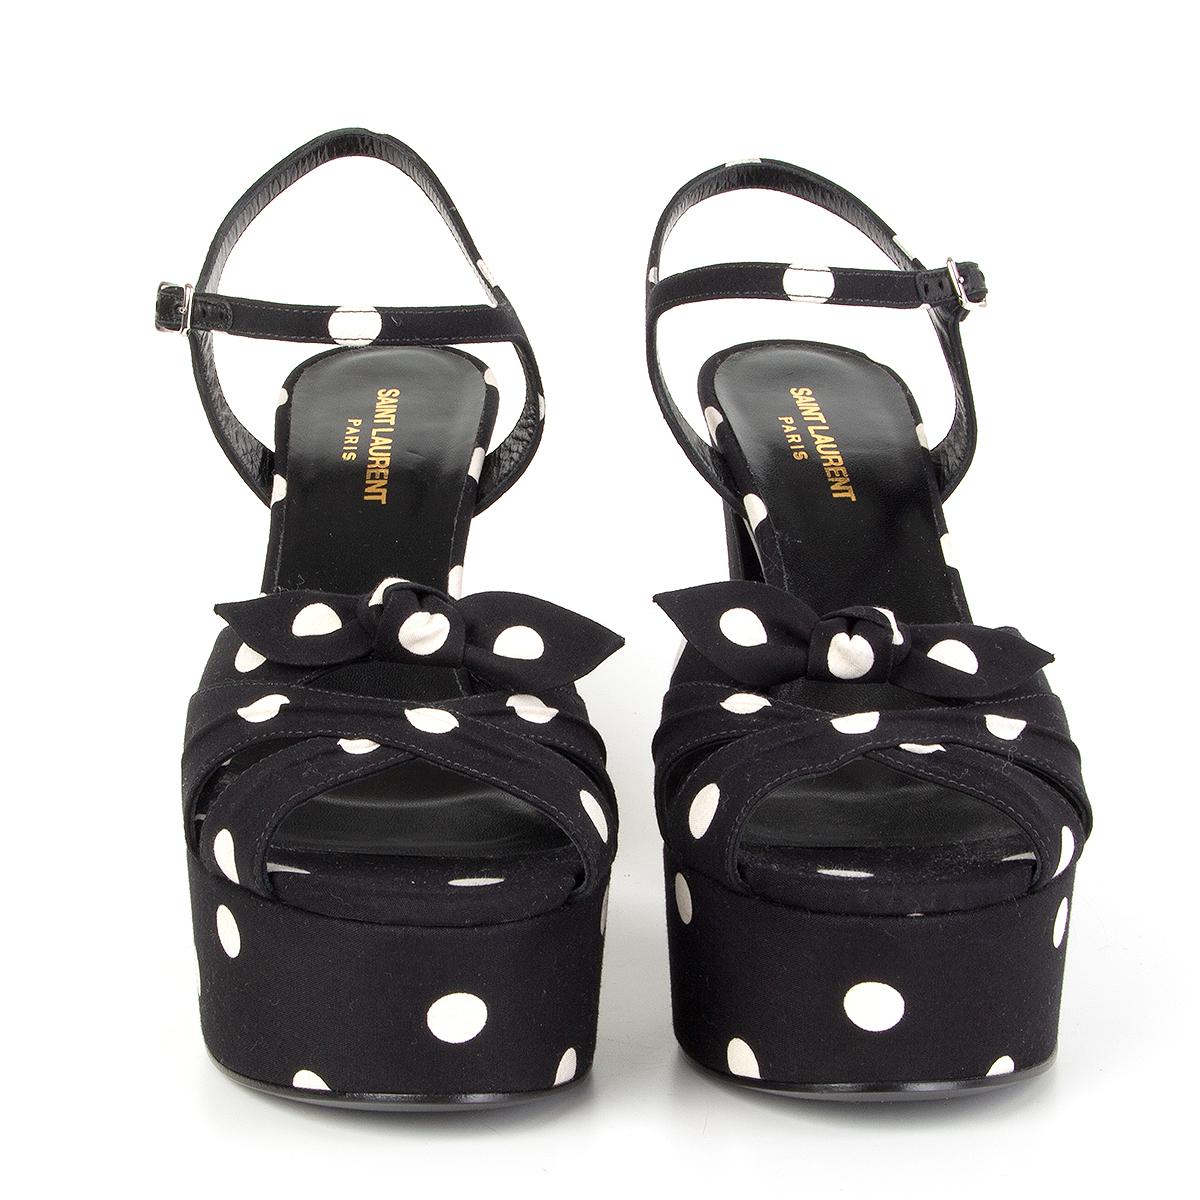 100% authentic Saint Laurent 'Candy' platform sandals in black and off-white polka dot cotton and bow detail. Brand new. 

Measurements
Imprinted Size	40.5
Shoe Size	40.5
Inside Sole	26cm (10.1in)
Width	8cm (3.1in)
Heel	14cm (5.5in)
Platform:	5cm